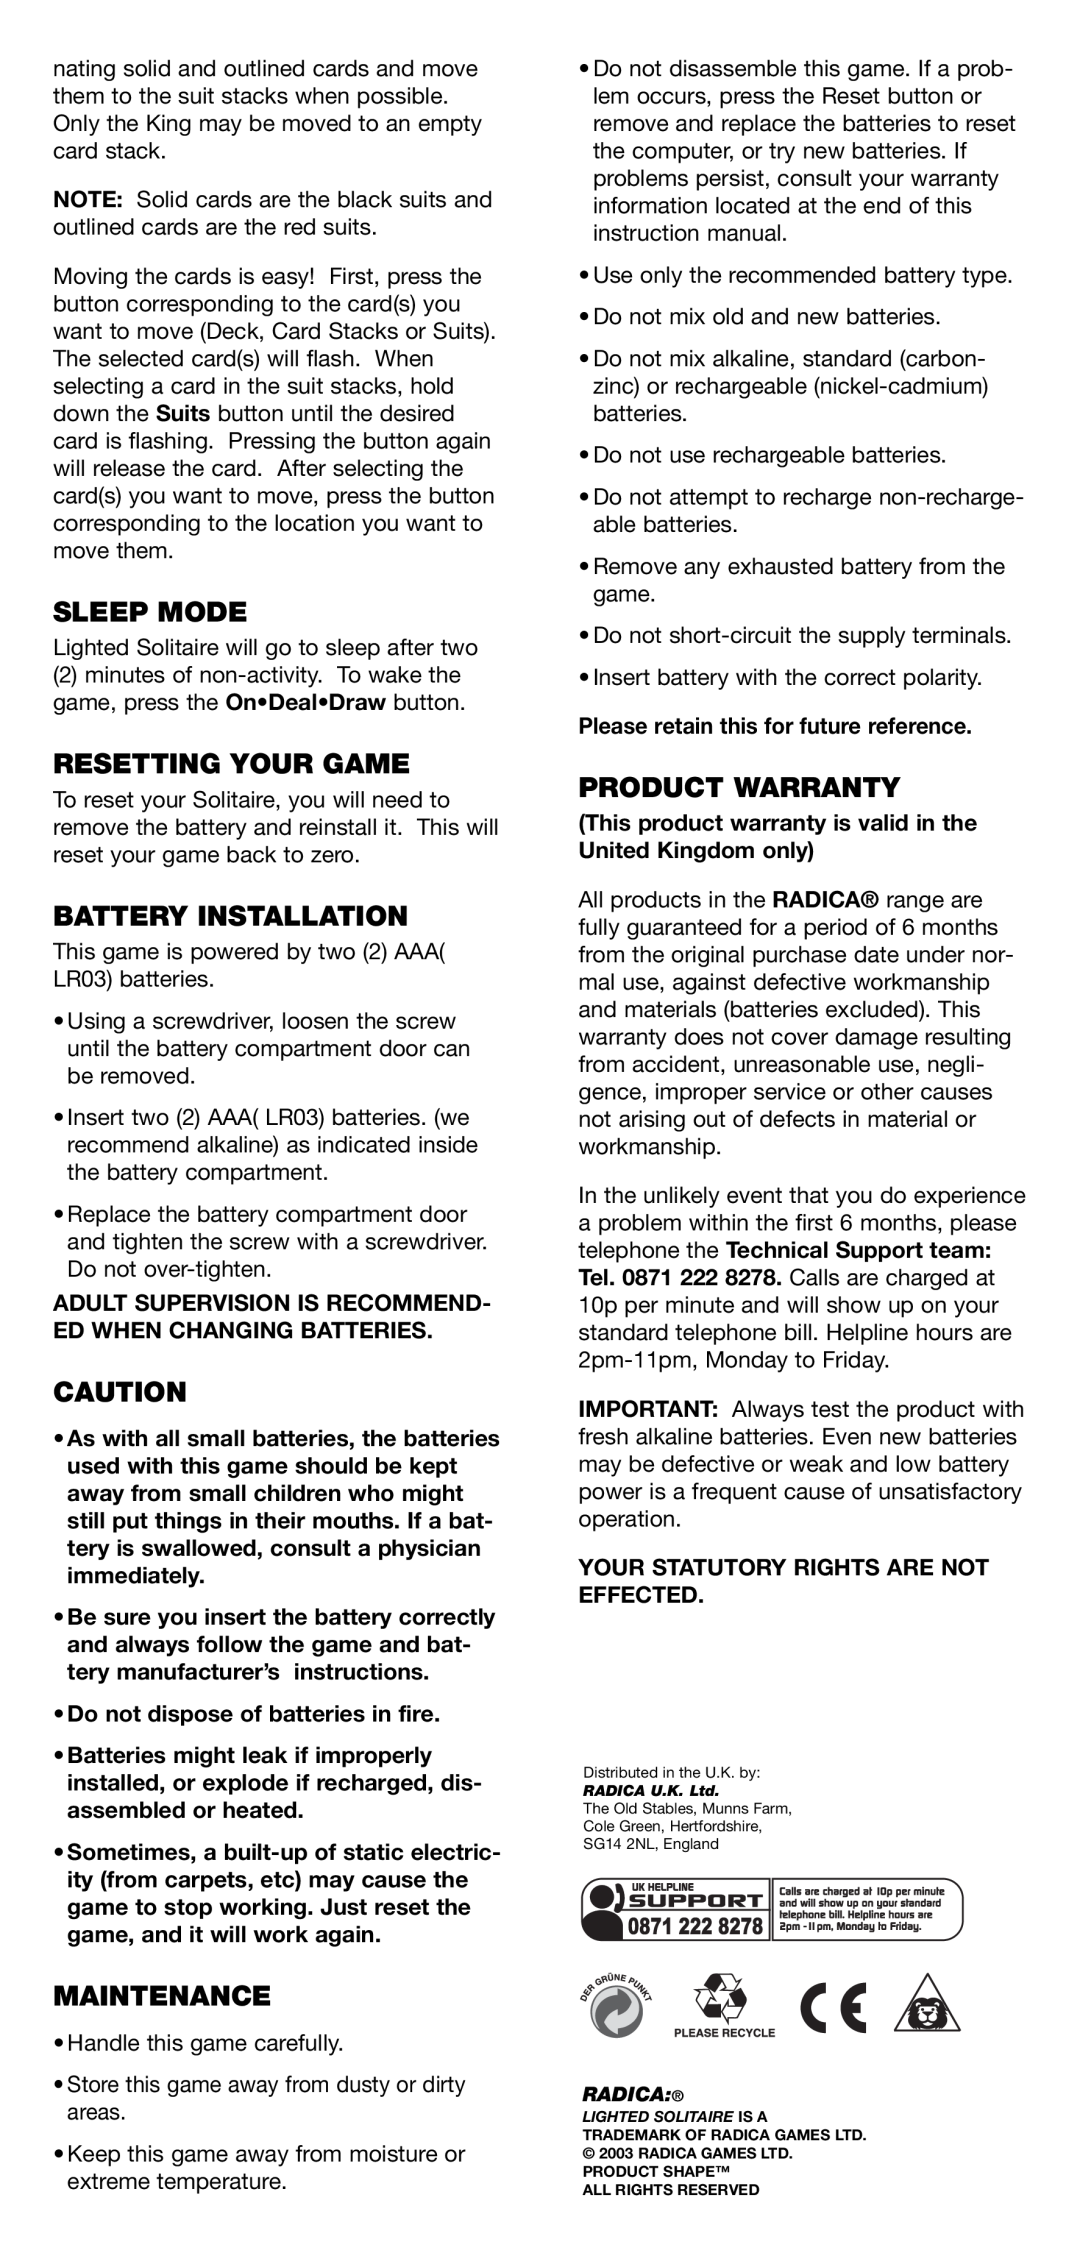 Radica Games 74014 instruction manual Sleep Mode, Resetting Your Game, Battery Installation, Maintenance, Product Warranty 